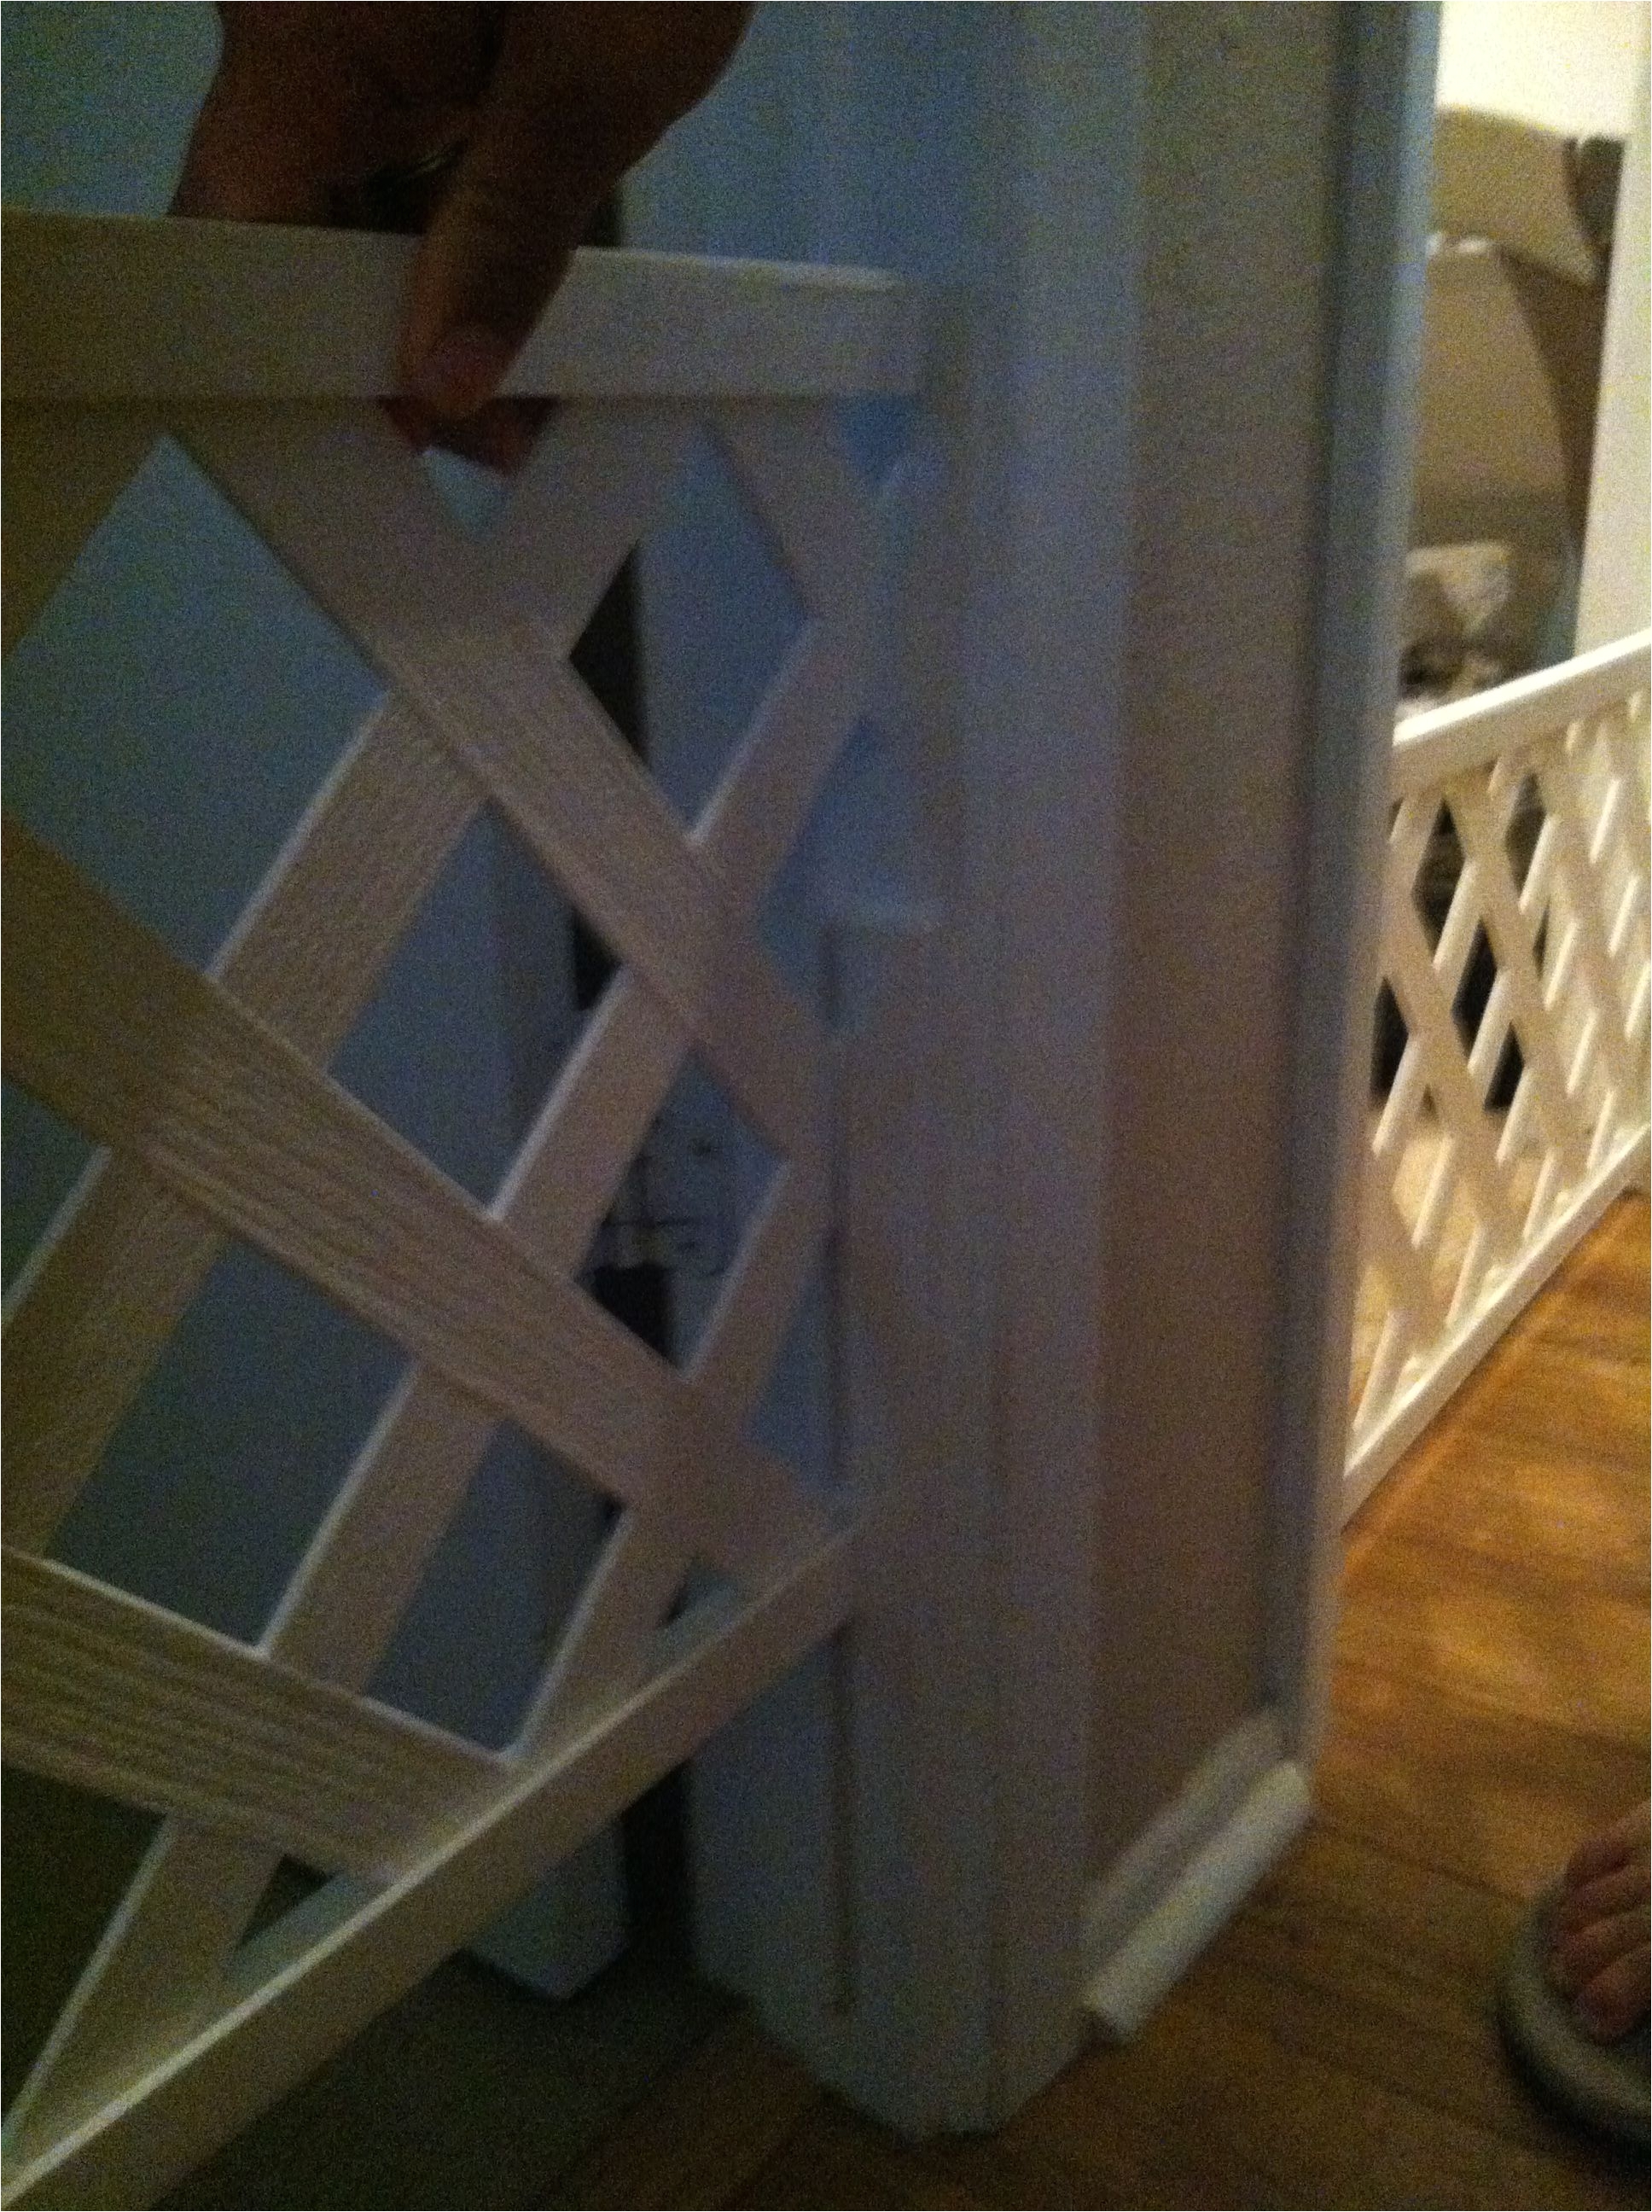 Decorative Wood Baby Gates Easy Diy Dog Gate Lattice Work and Apply A Piace Of Wood to the